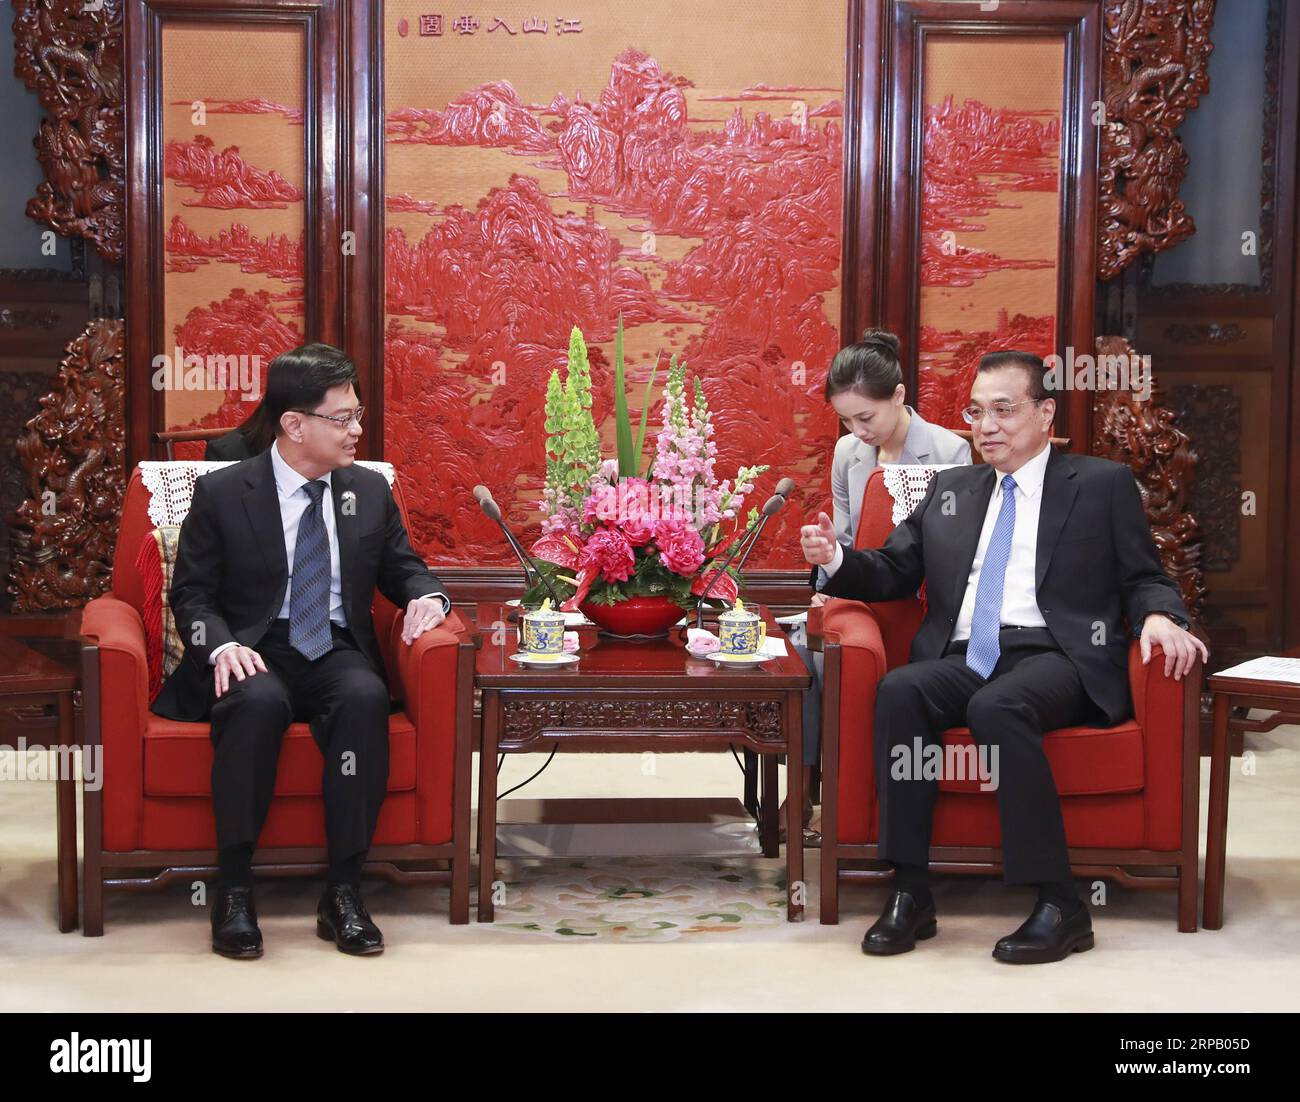 (190523) -- BEIJING, May 23, 2019 (Xinhua) -- Chinese Premier Li Keqiang (R, front) meets with Singaporean Deputy Prime Minister and Finance Minister Heng Swee Keat in Beijing, capital of China, May 23, 2019. (Xinhua/Pang Xinglei) CHINA-BEIJING-LI KEQIANG-SINGAPORE-HENG SWEE KEAT-MEETING (CN) PUBLICATIONxNOTxINxCHN Stock Photo